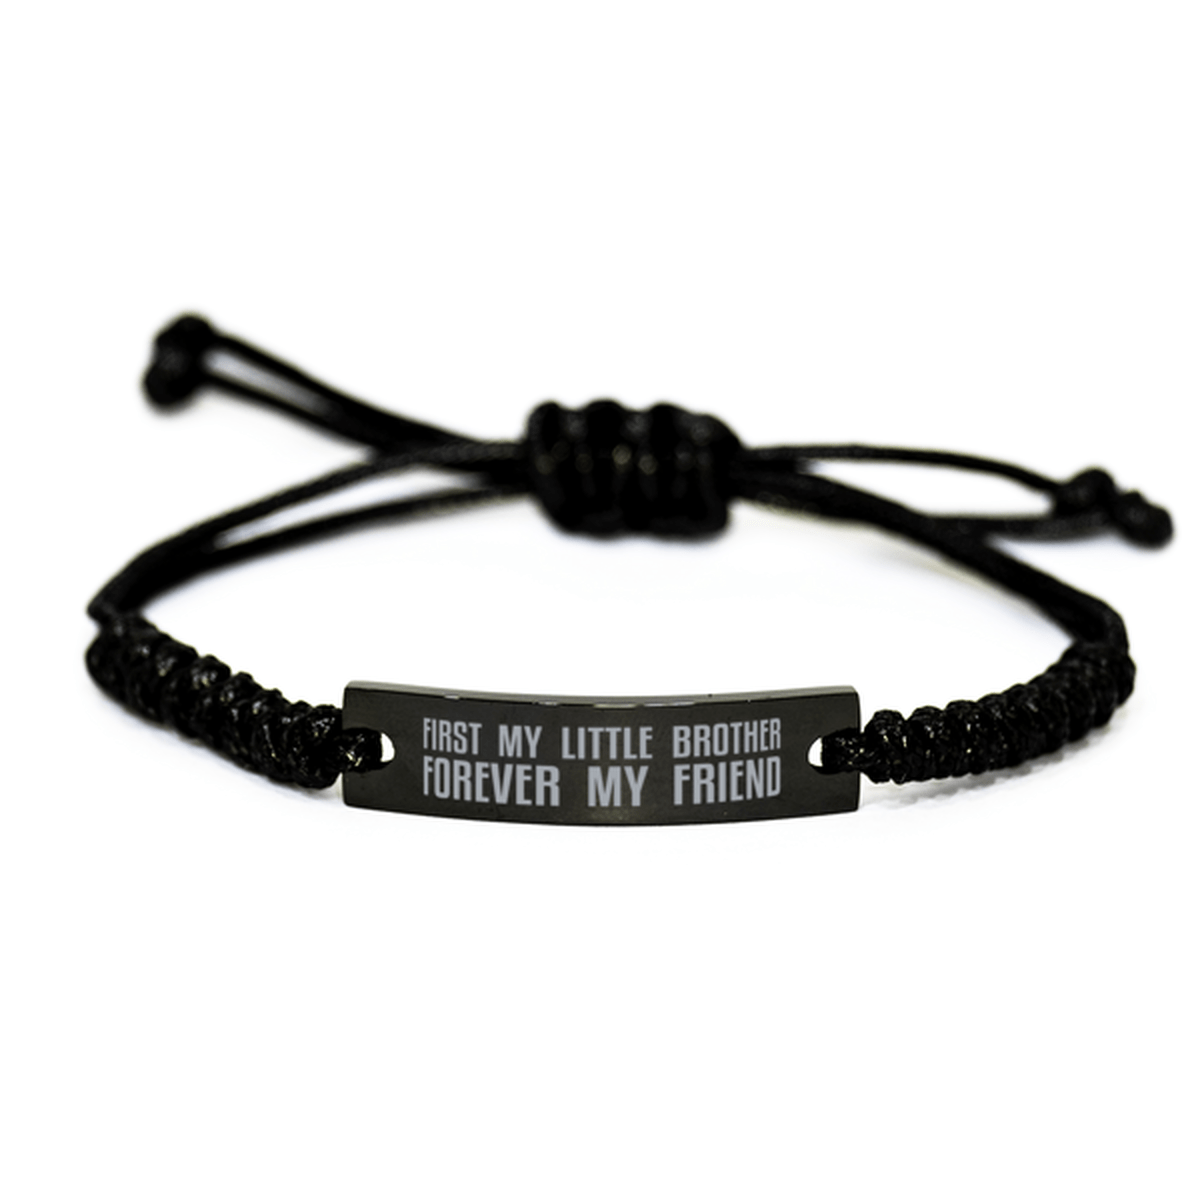 Unique Little Brother Engraved Rope Bracelet, First My Little Brother Forever My Friend, Best Gift for Little Brother Birthday, Christmas